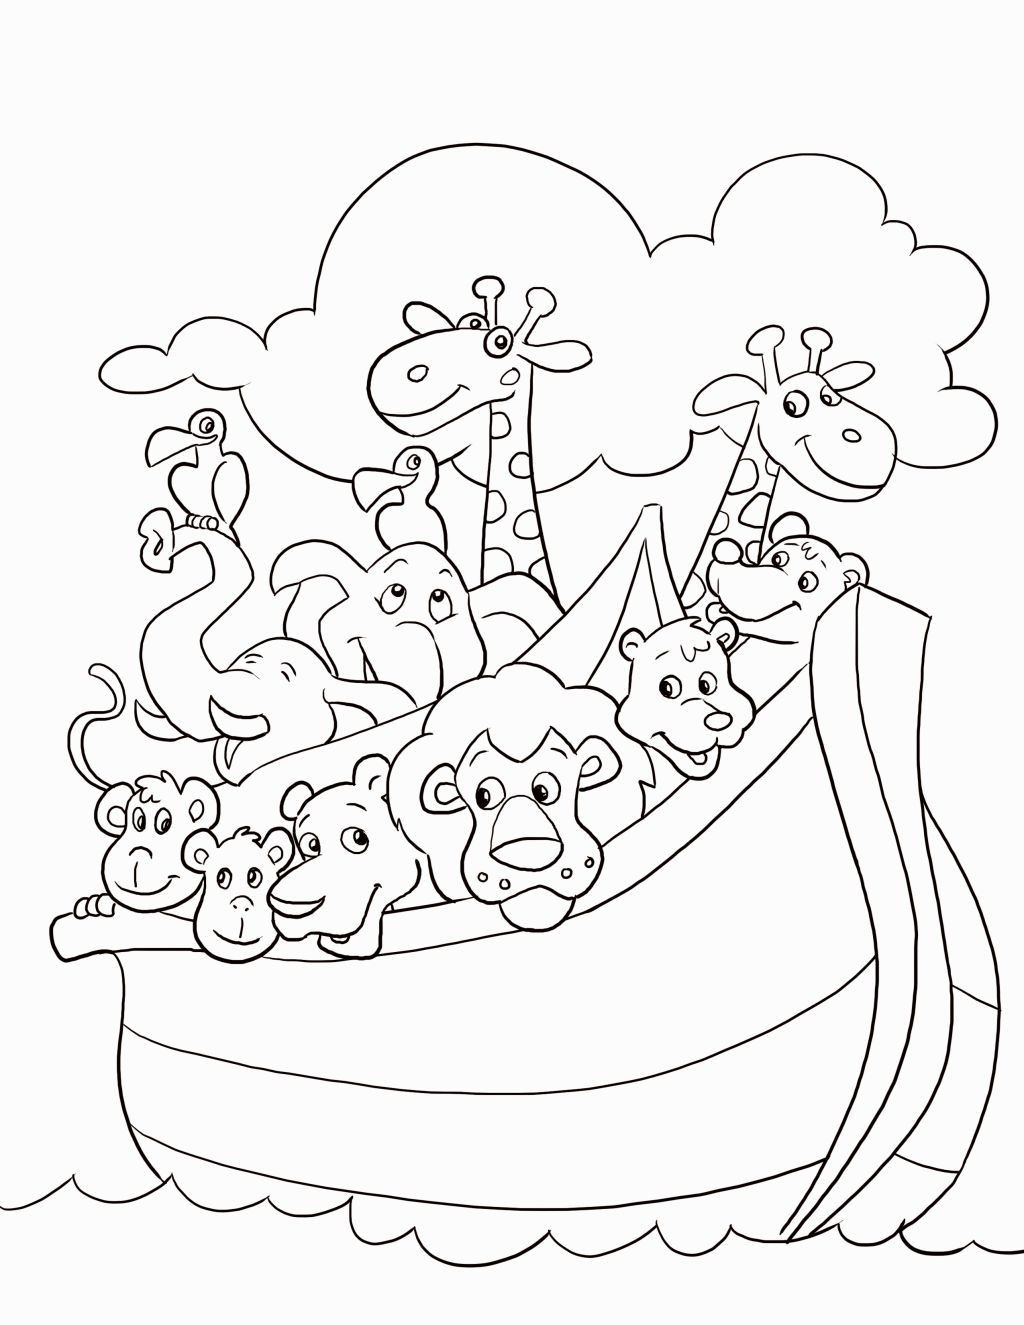 Christian Kids Coloring Pages
 Christian Coloring Pages For Preschoolers